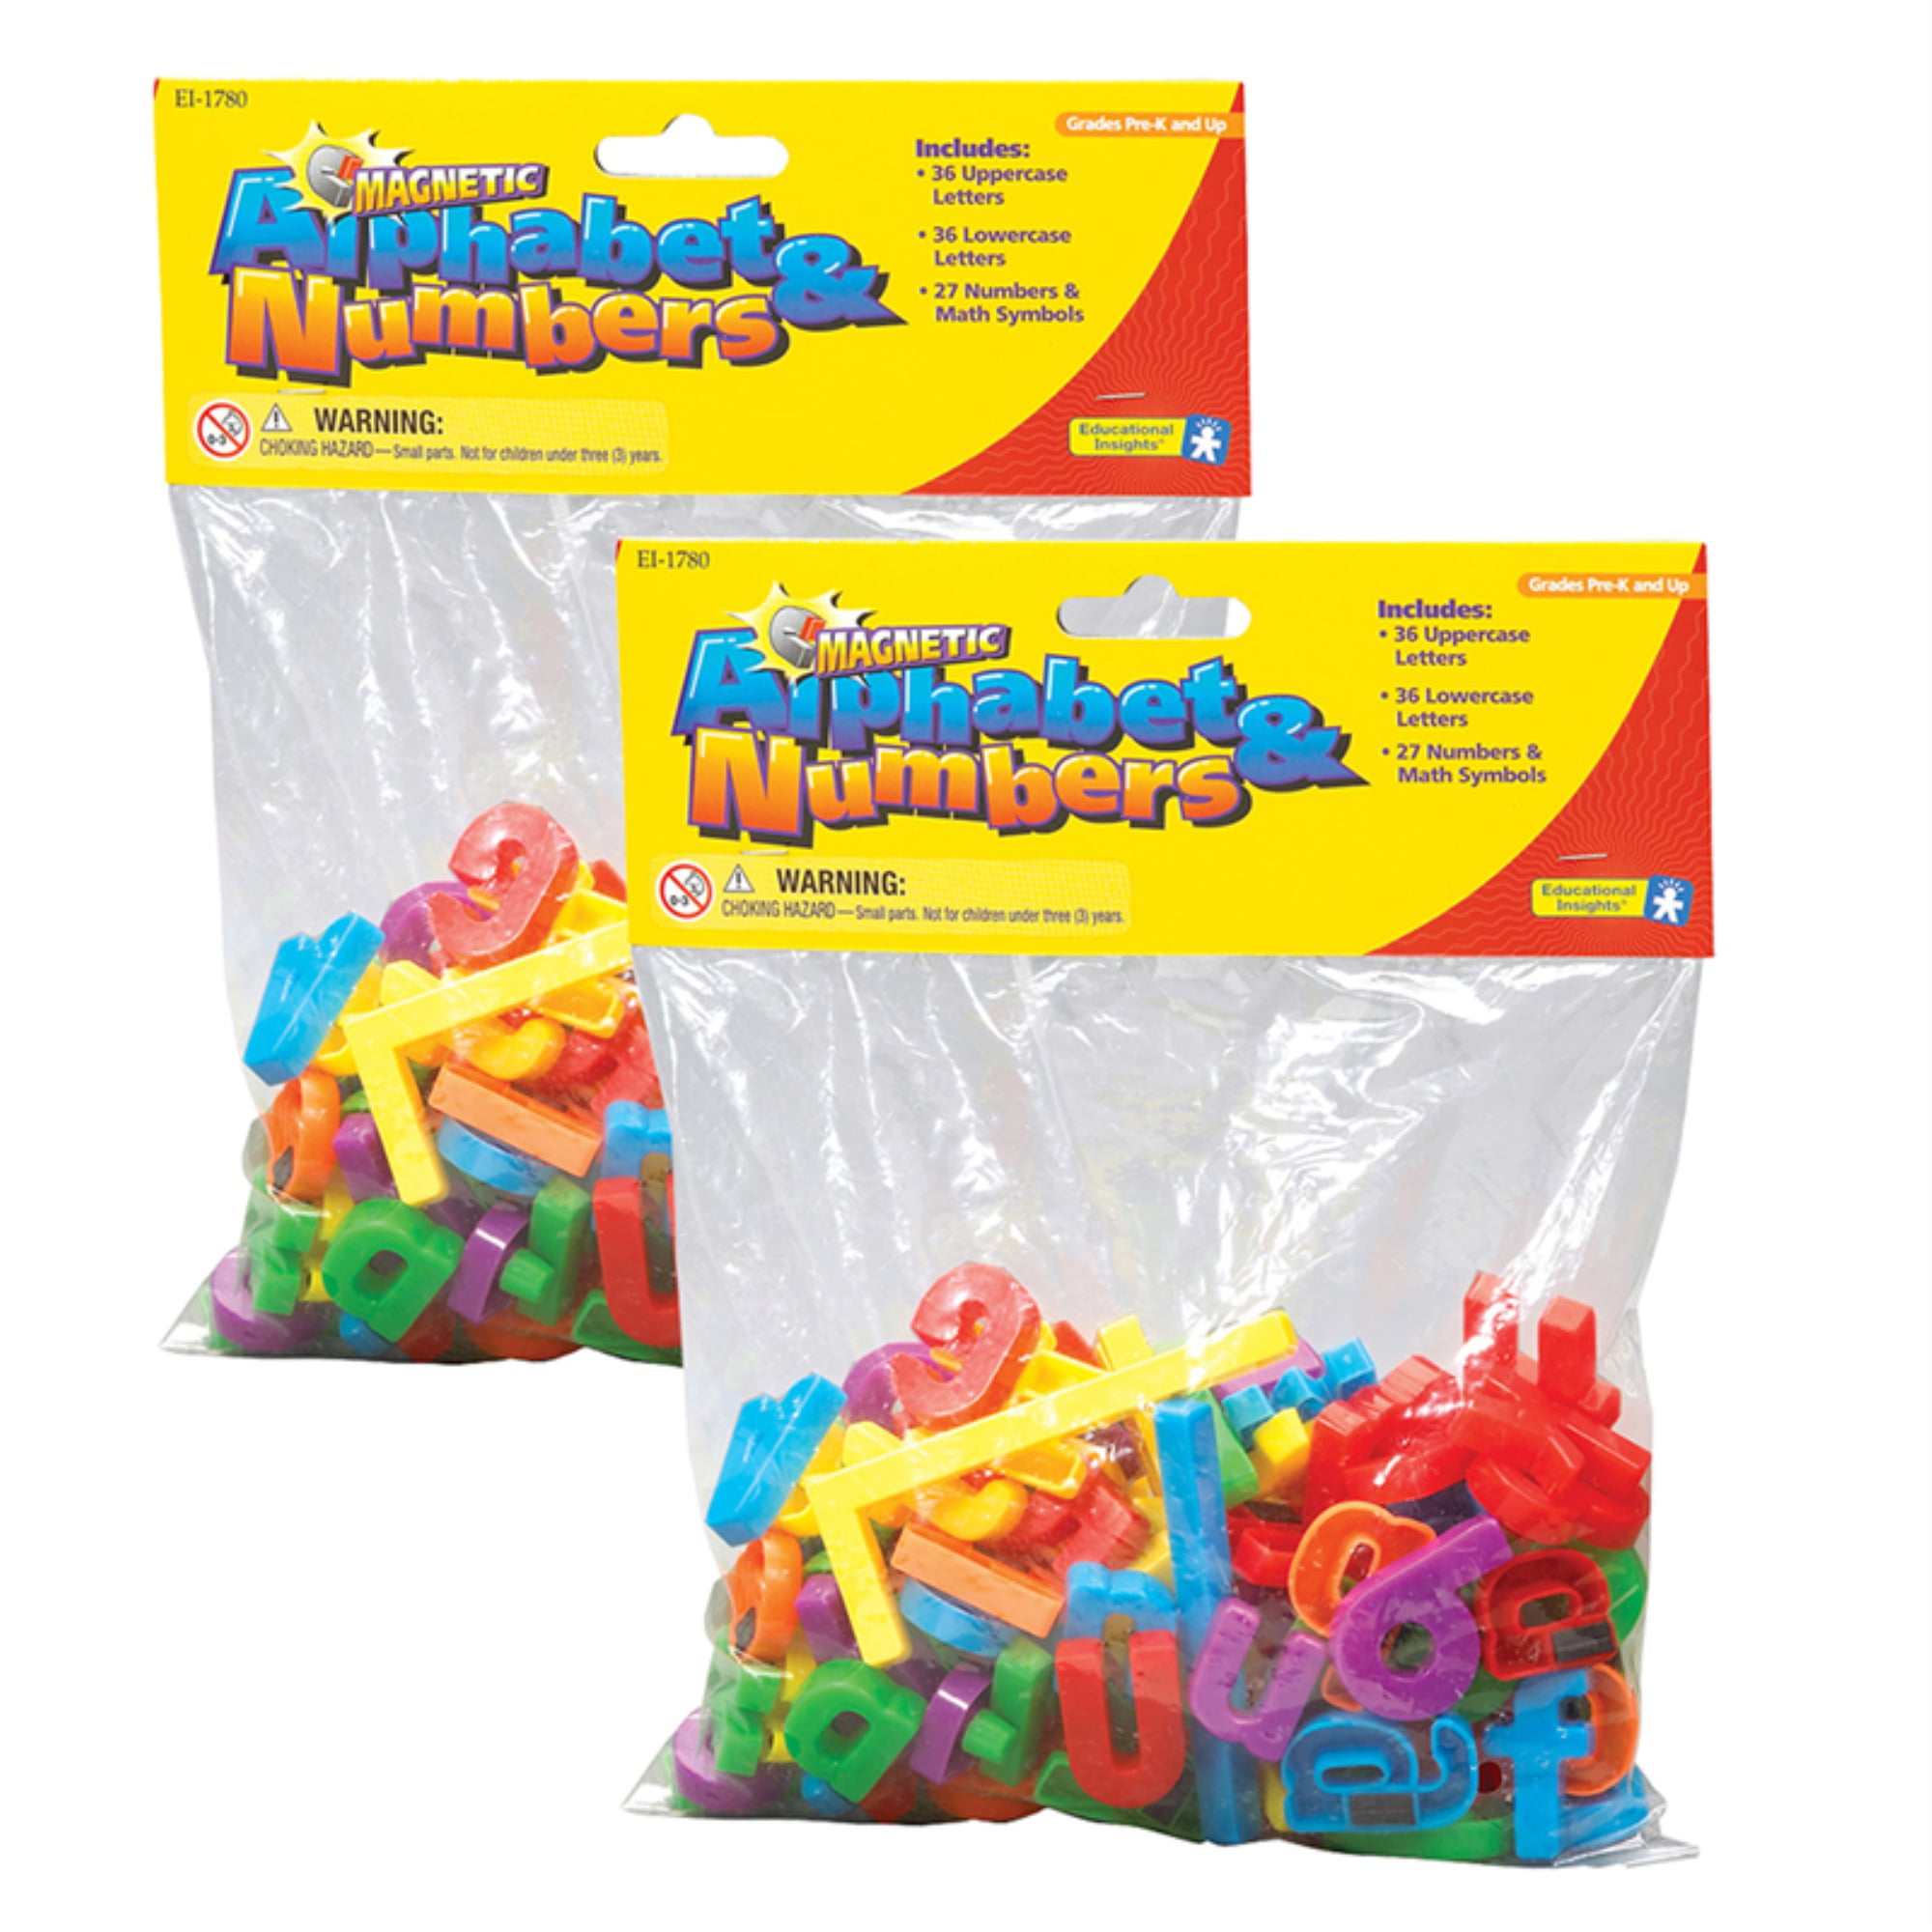 NEW Pack of Multicolor Glow in the Dark Magnetic Numbers 